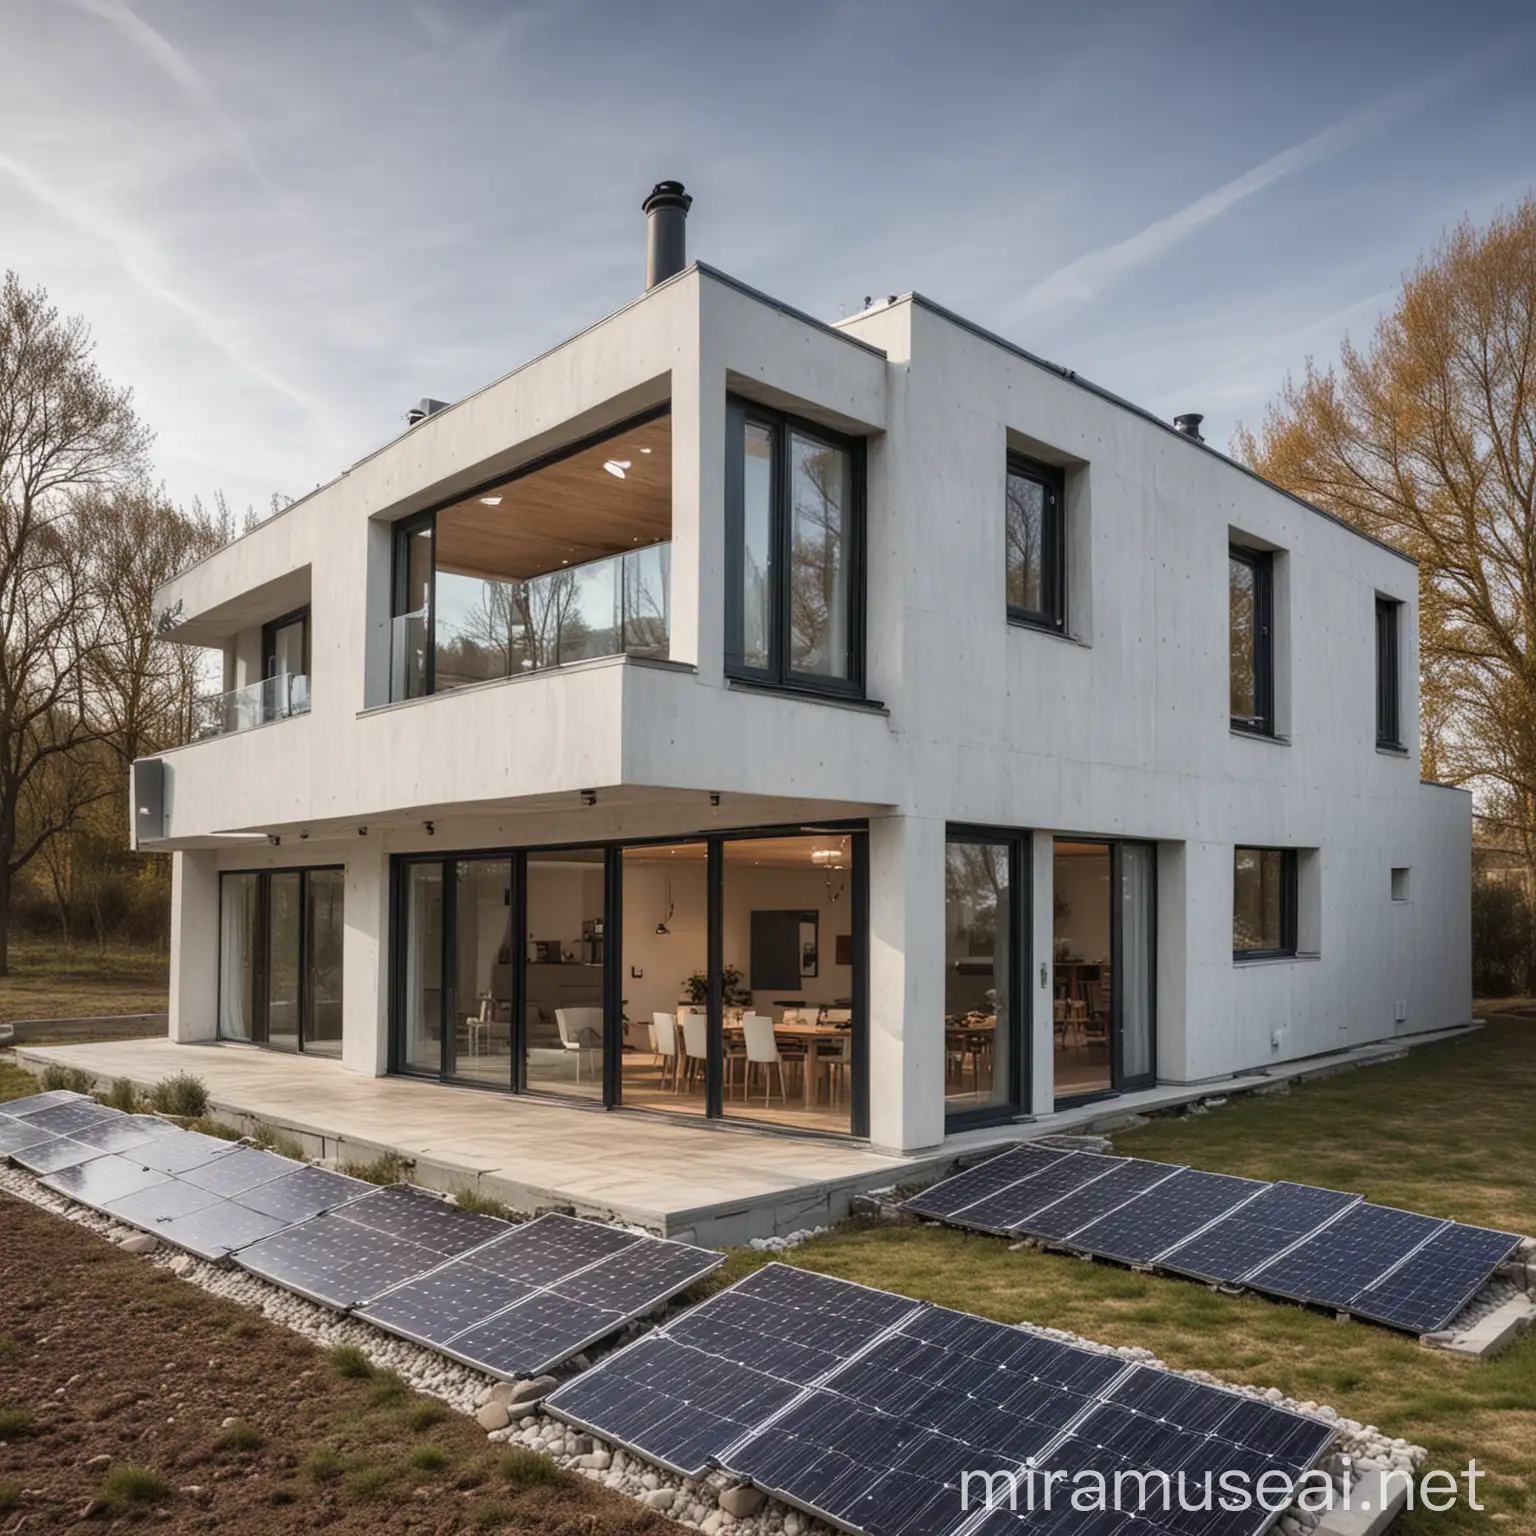 spacious house with walls of flexible solar panels